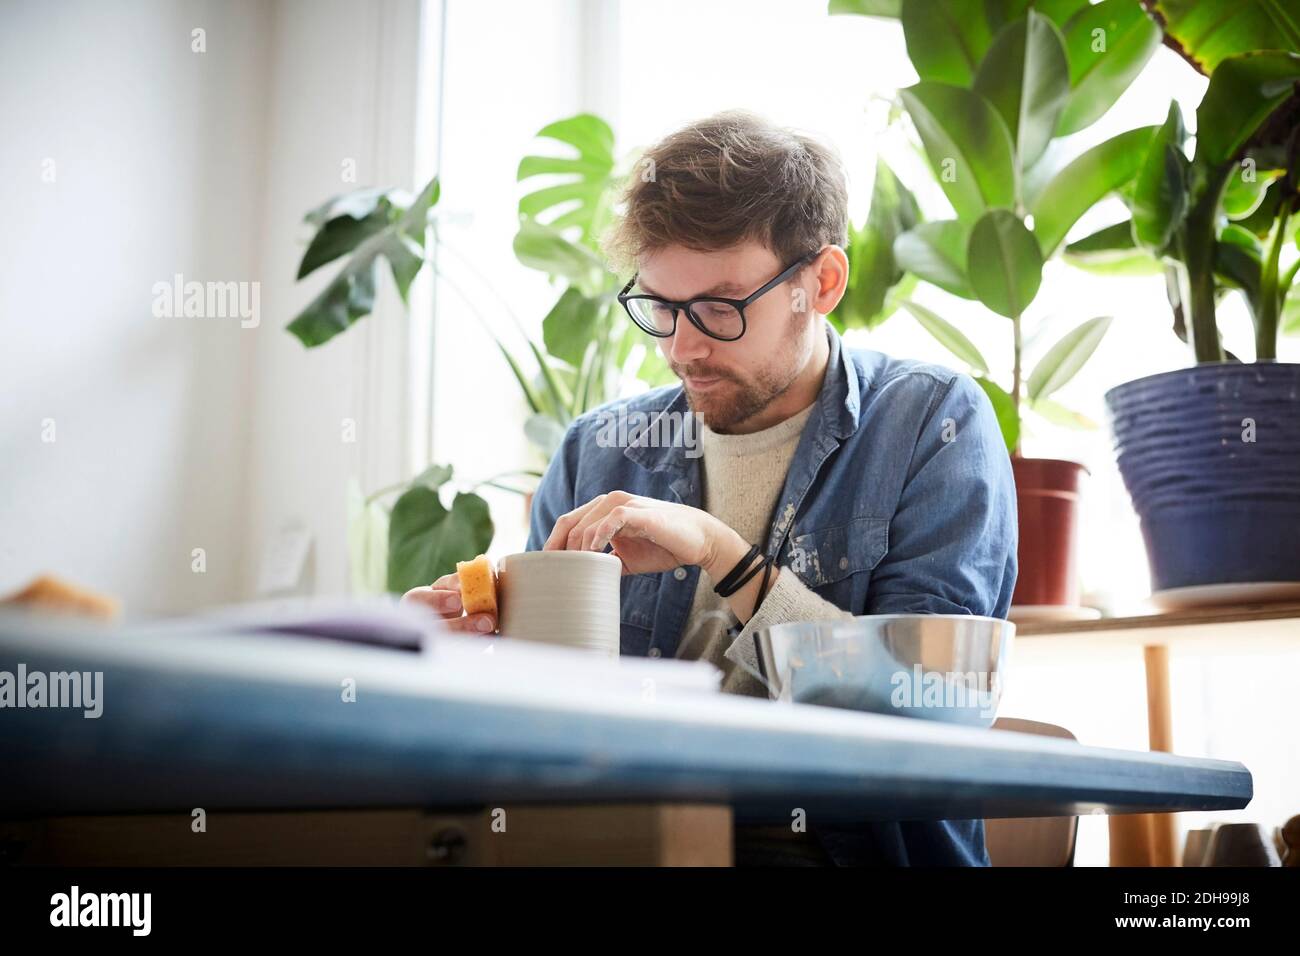 Young man making craft product in pottery class Stock Photo